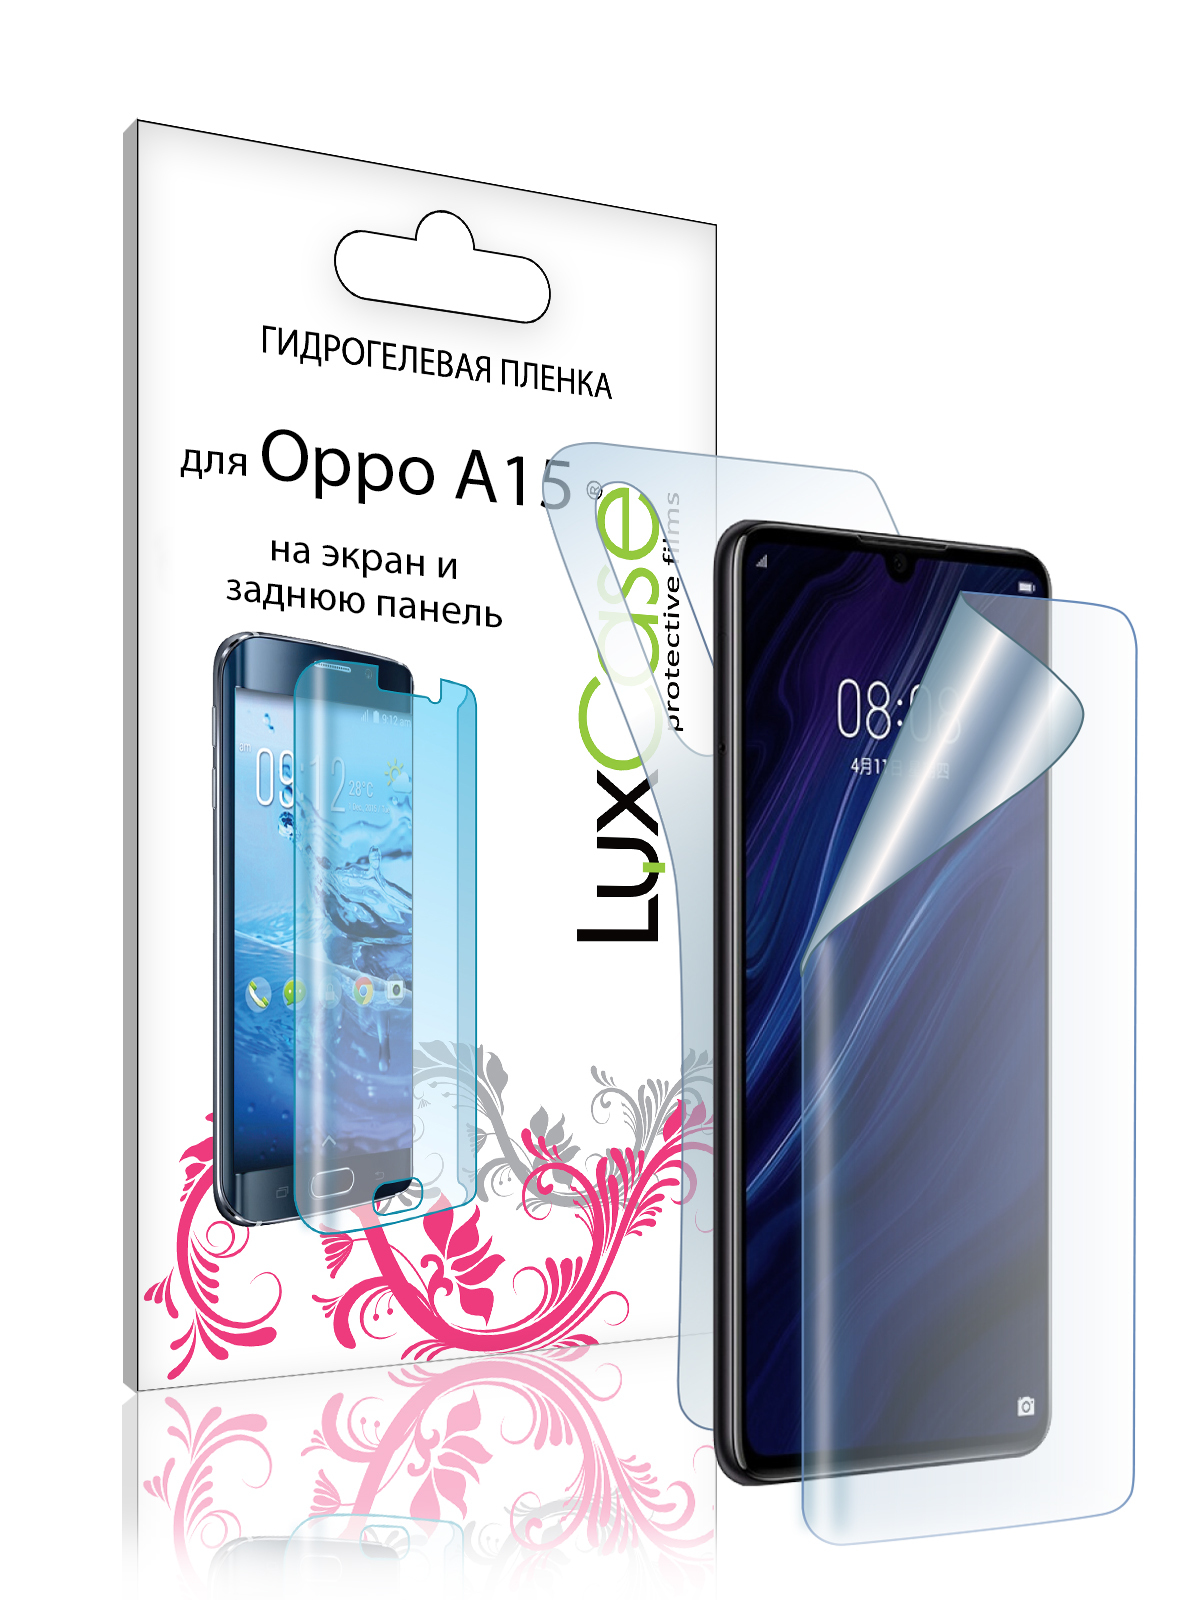 Пленка гидрогелевая LuxCase для Oppo A15 0.14mm Front and Back Transparent 86556 гидрогелевая пленка luxcase для oppo a12 0 14mm front and back transparent 86974